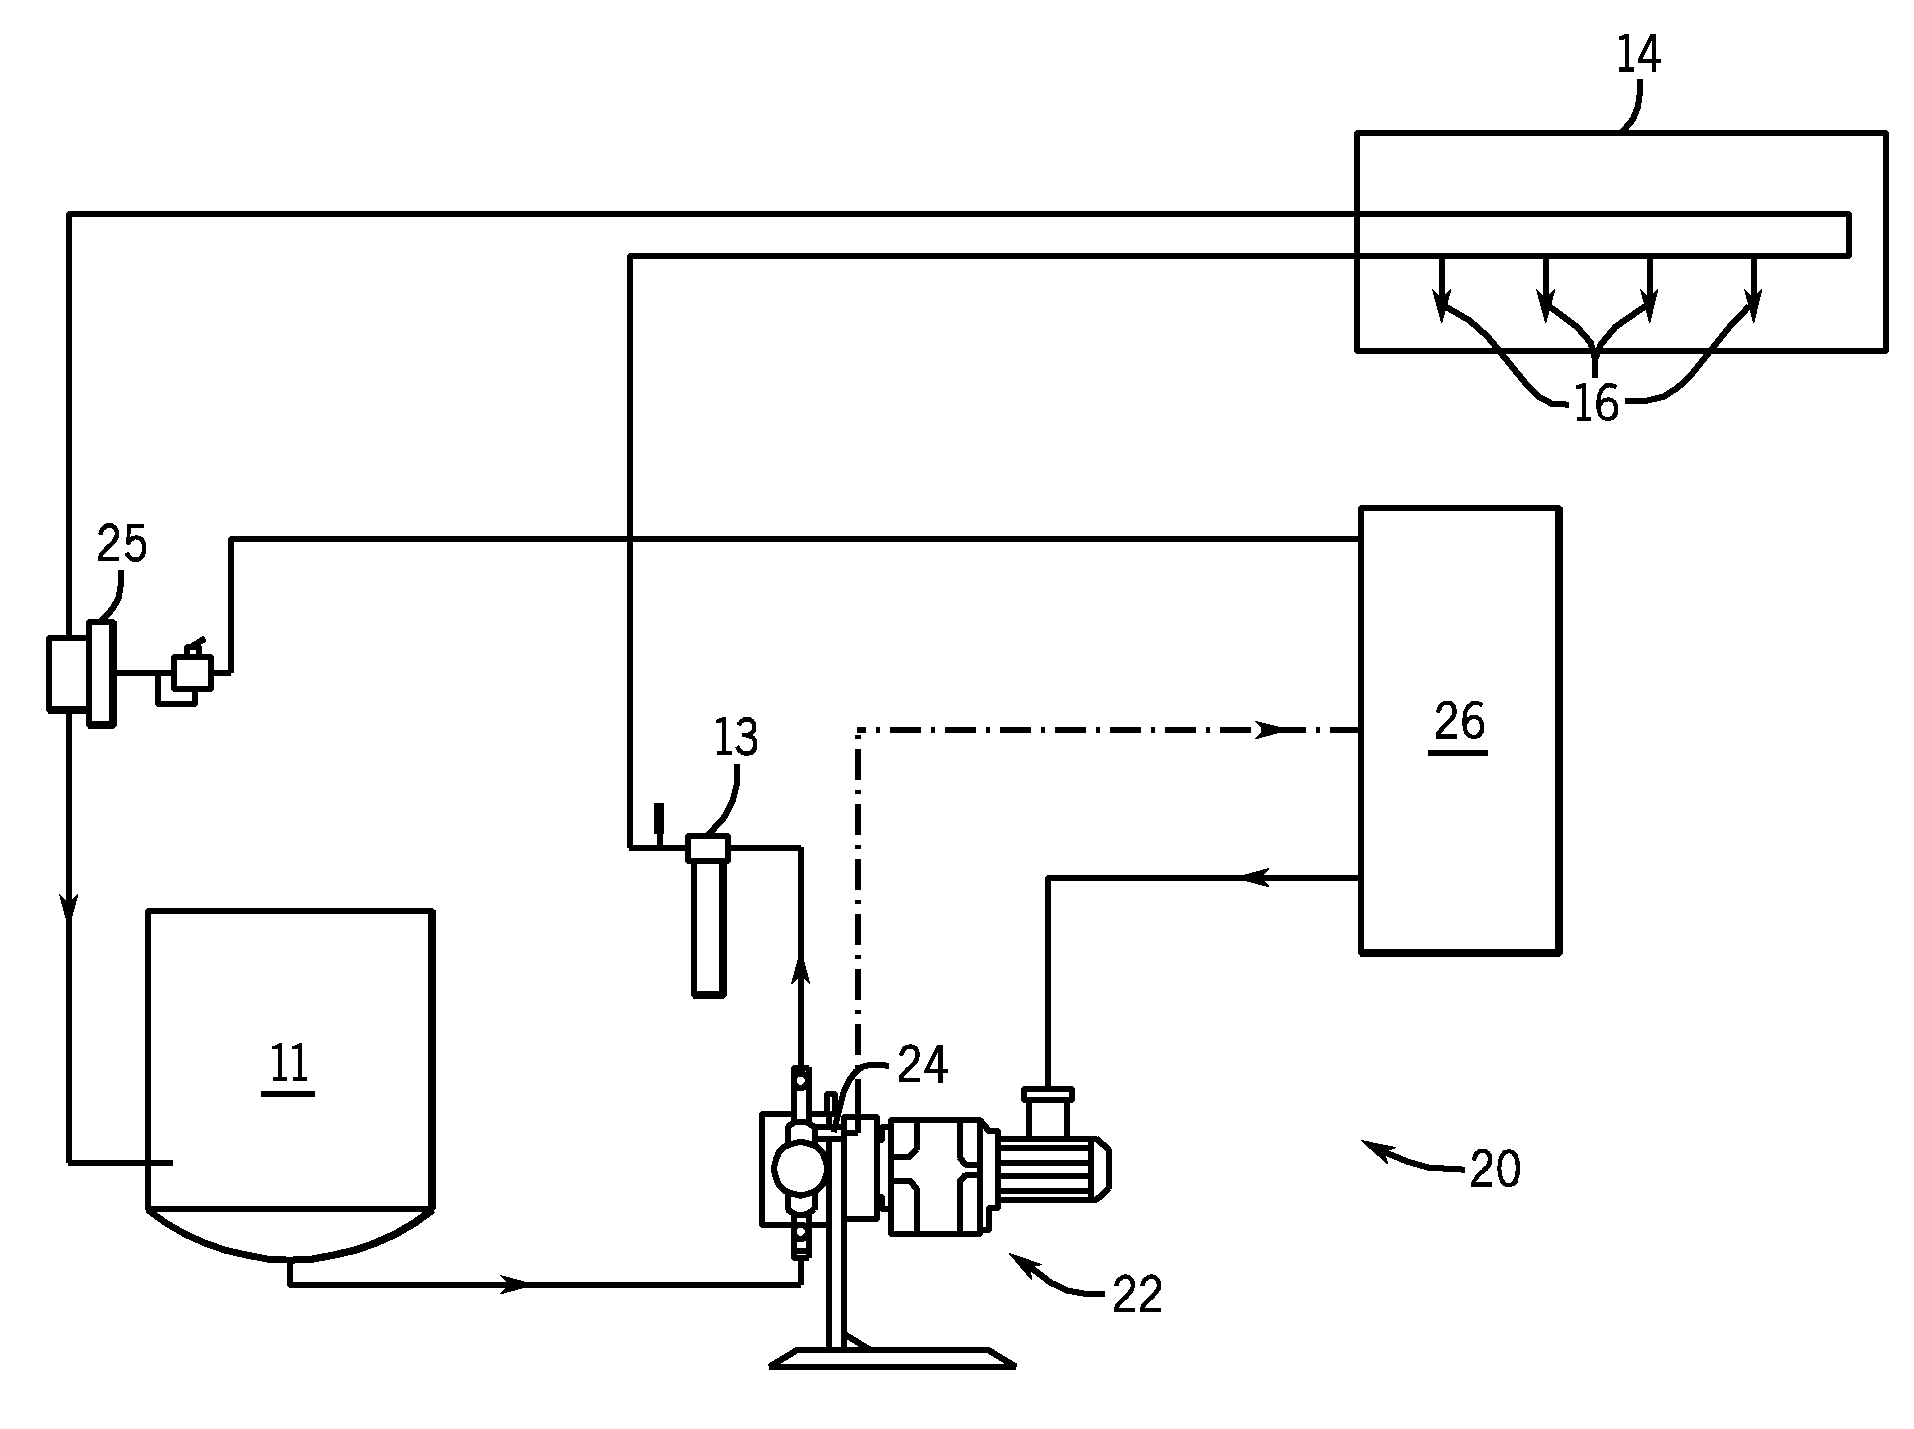 Paint circulating system and method